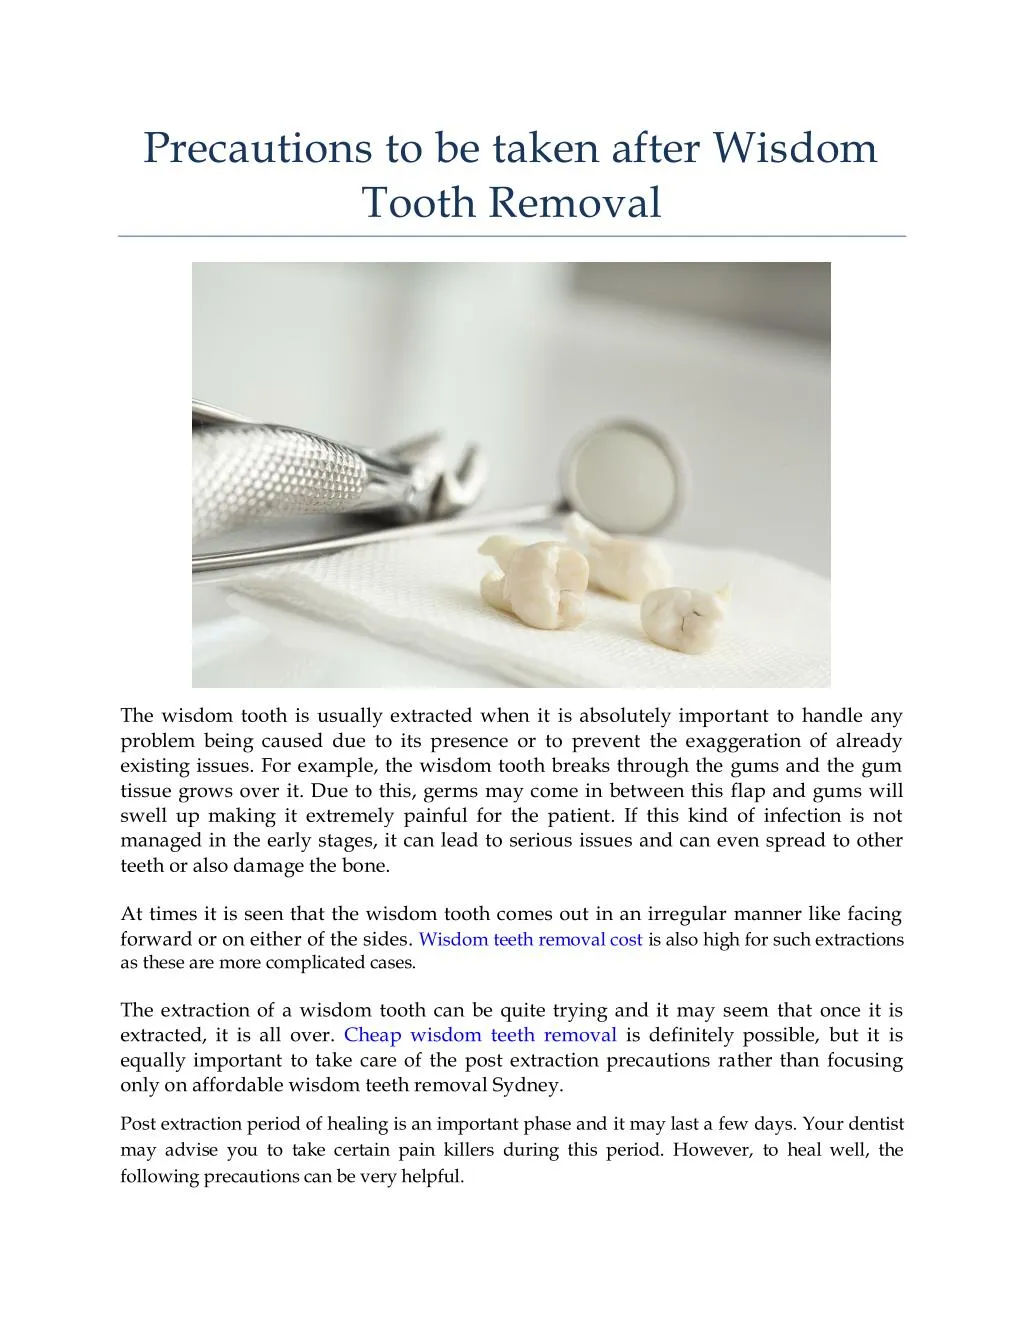 precautions to be taken after wisdom tooth removal